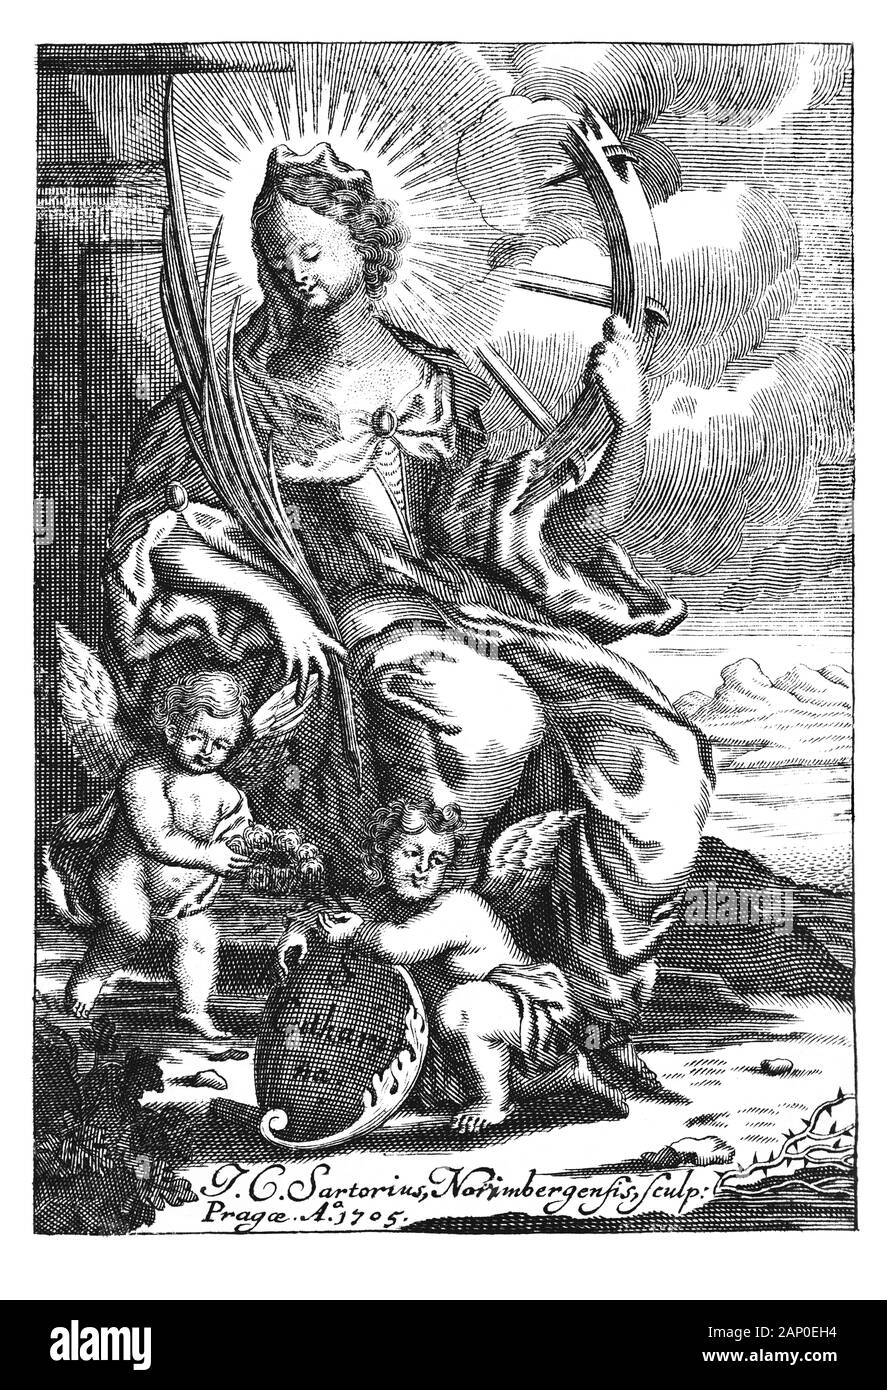 Antique vintage religious allegorical engraving or drawing of Christian holy woman saint Catherine or Katharine of Alexandria with wheel.Illustration from Book Die Betrubte Und noch Ihrem Beliebten..., Austrian Empire,1716. Artist J.C.Sartorius. Stock Photo